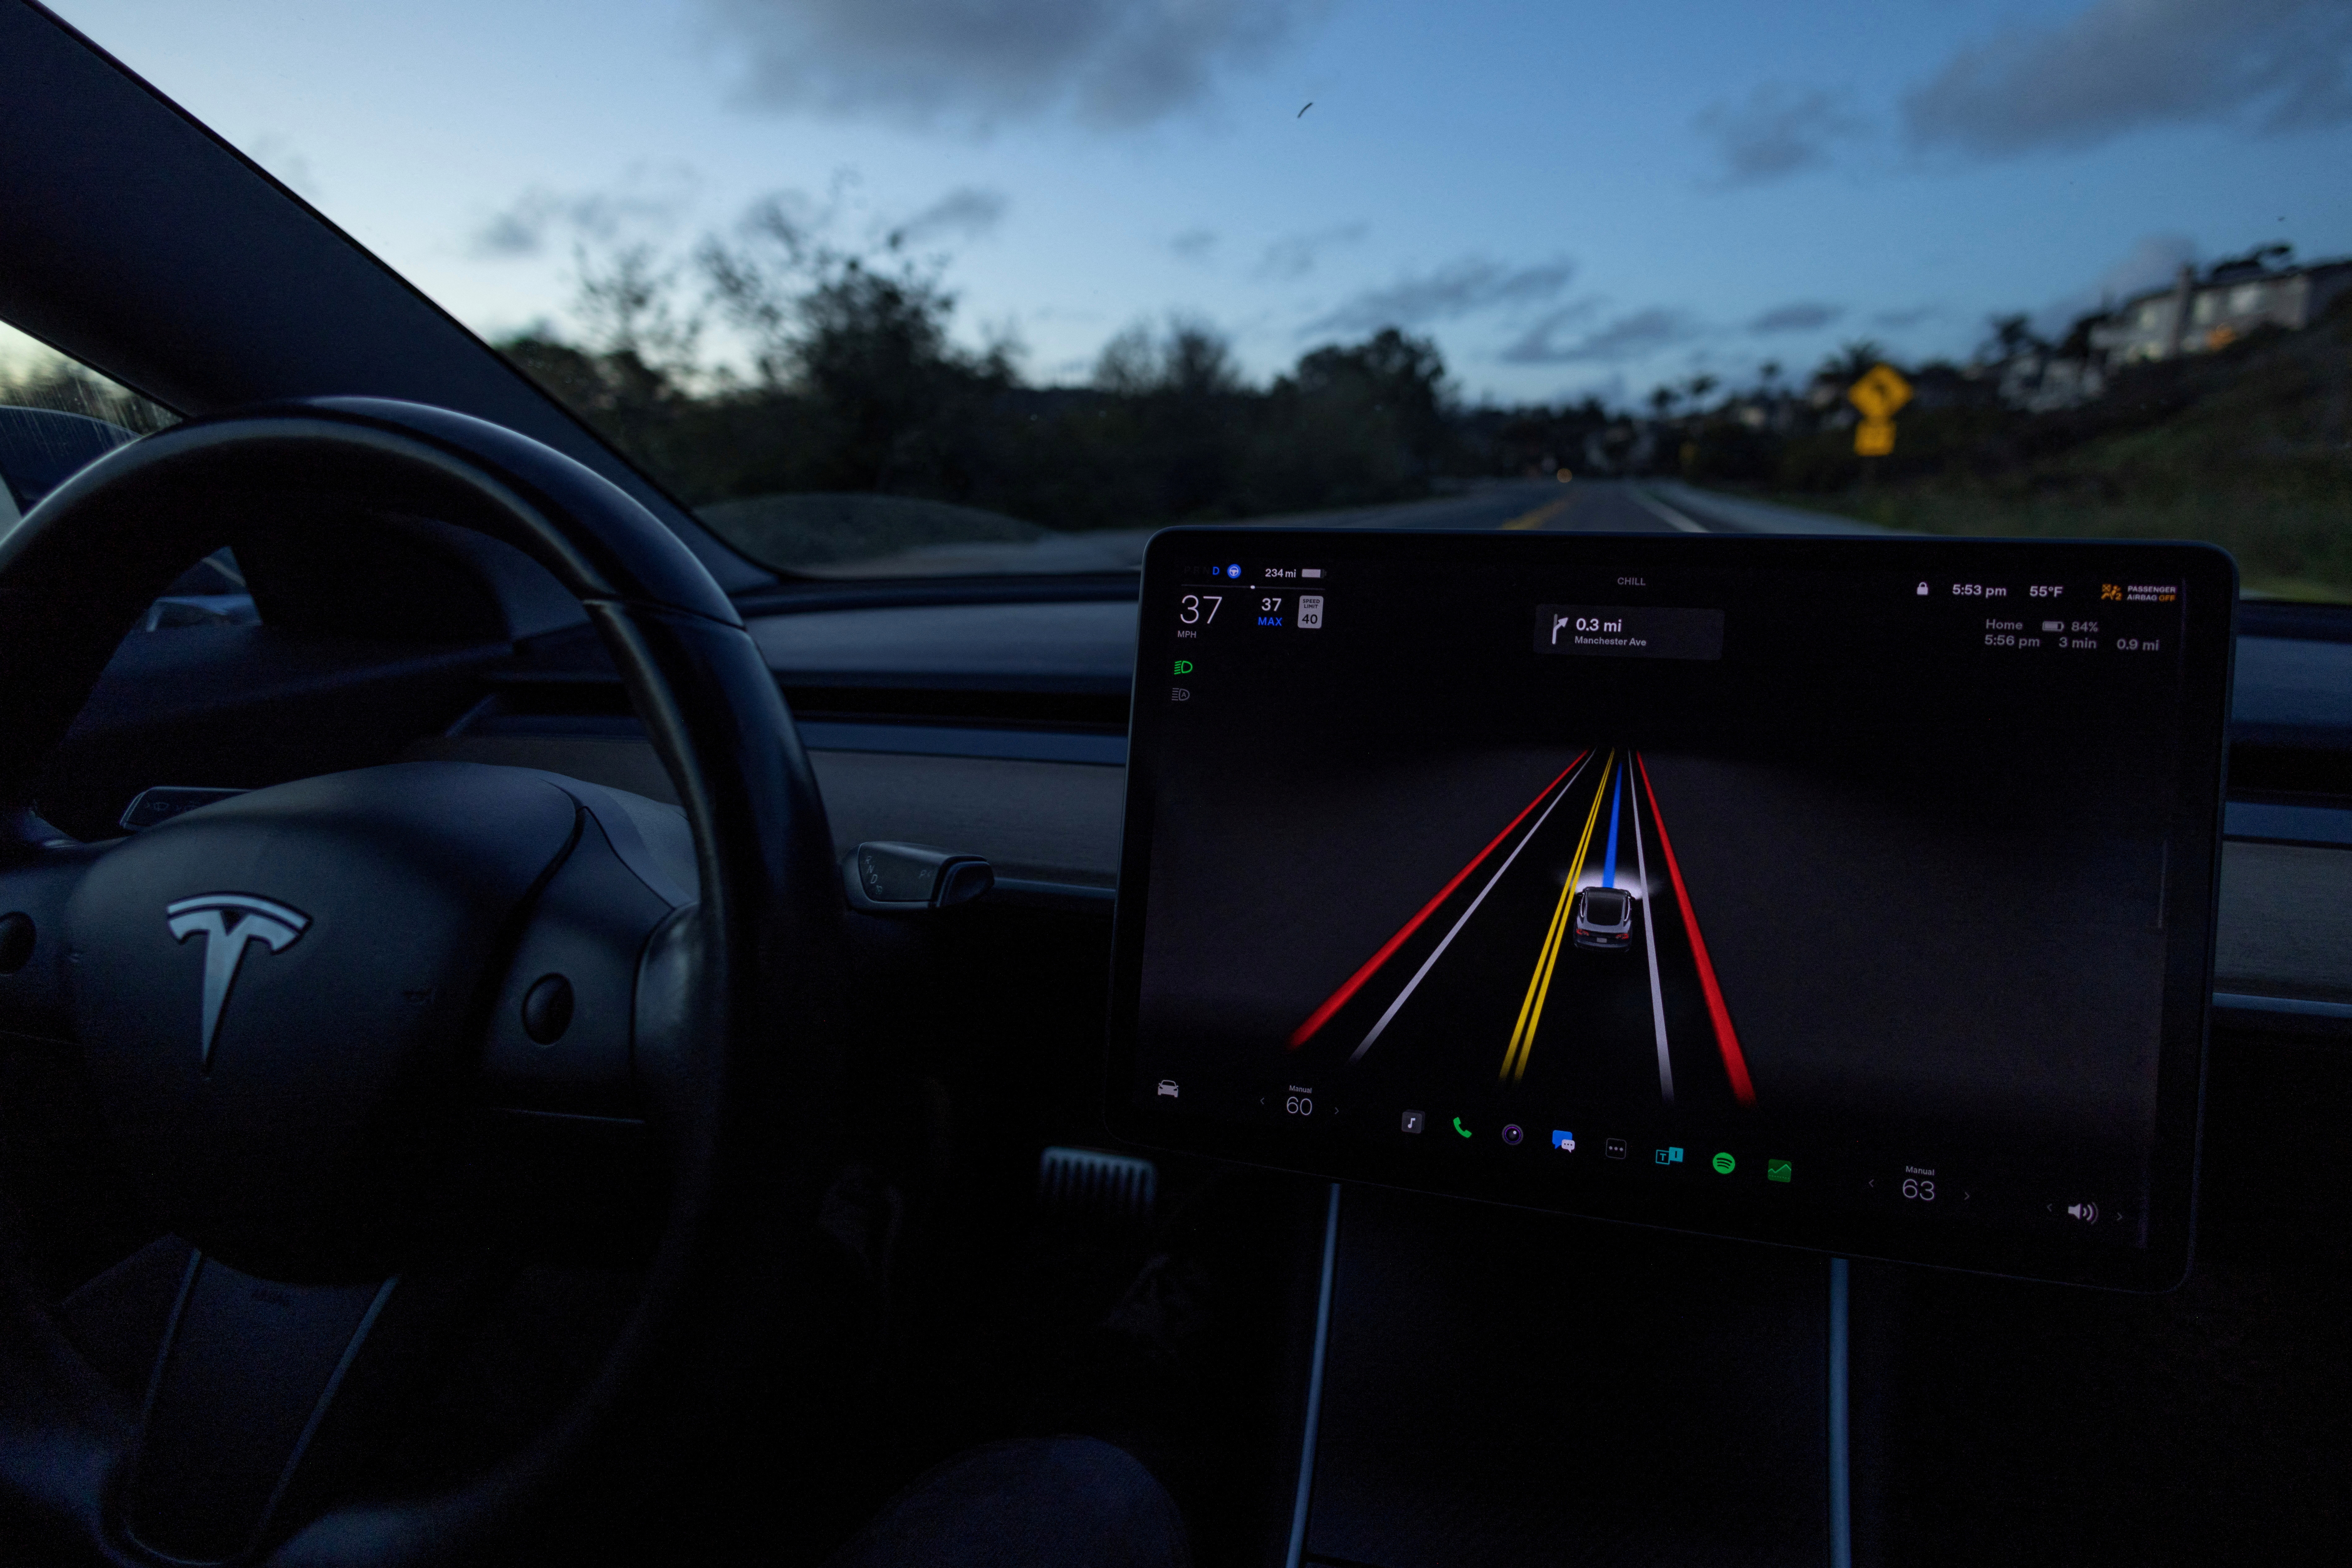 A New Tesla Safety Concern: Drivers Can Play Video Games in Moving